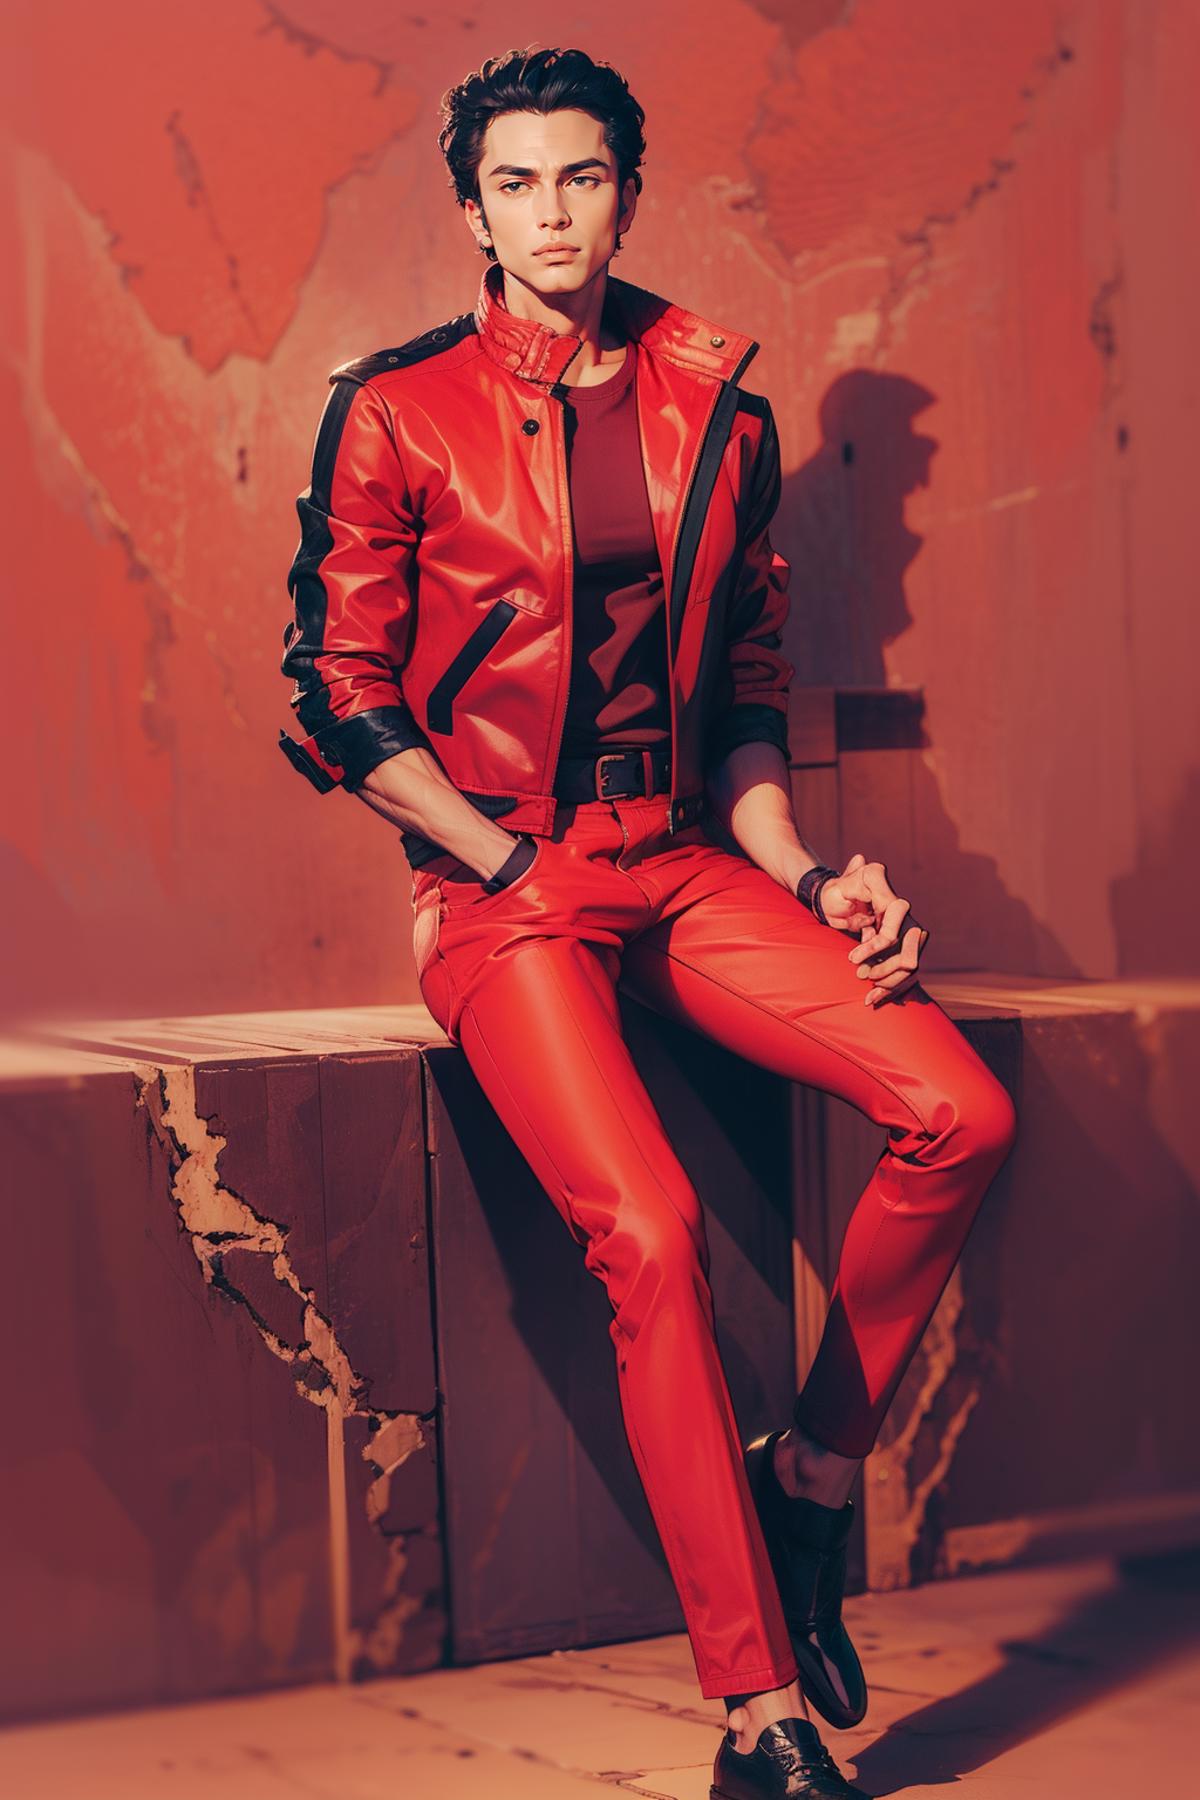 MJ Thriller Outfit - Requested image by freckledvixon